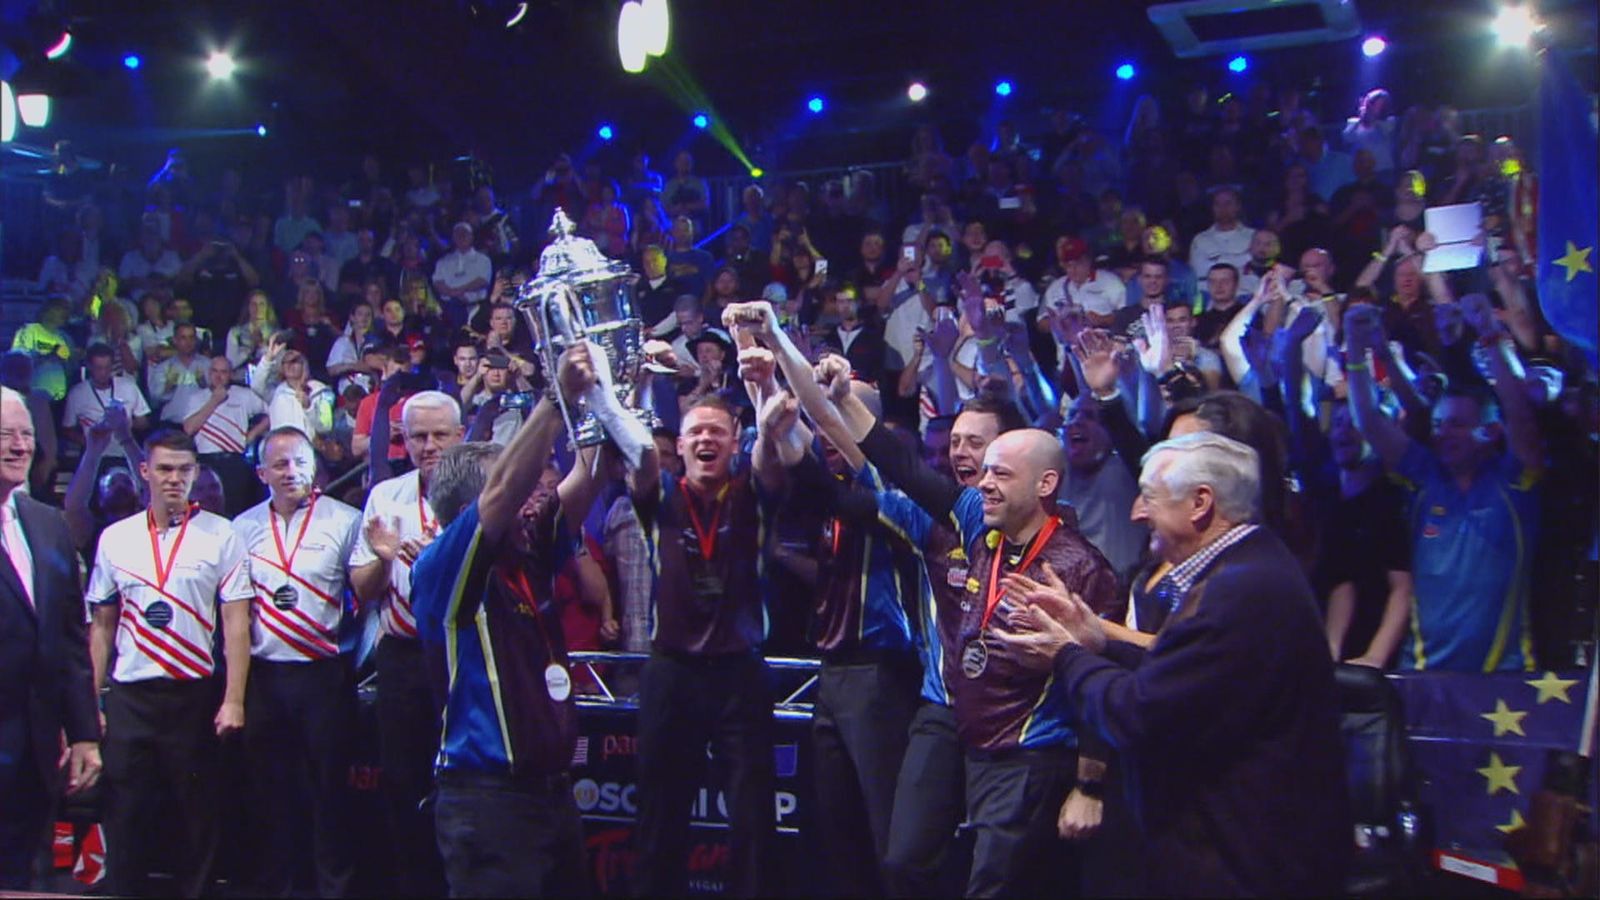 Europe have won the Mosconi Cup for the sixth time in a row News